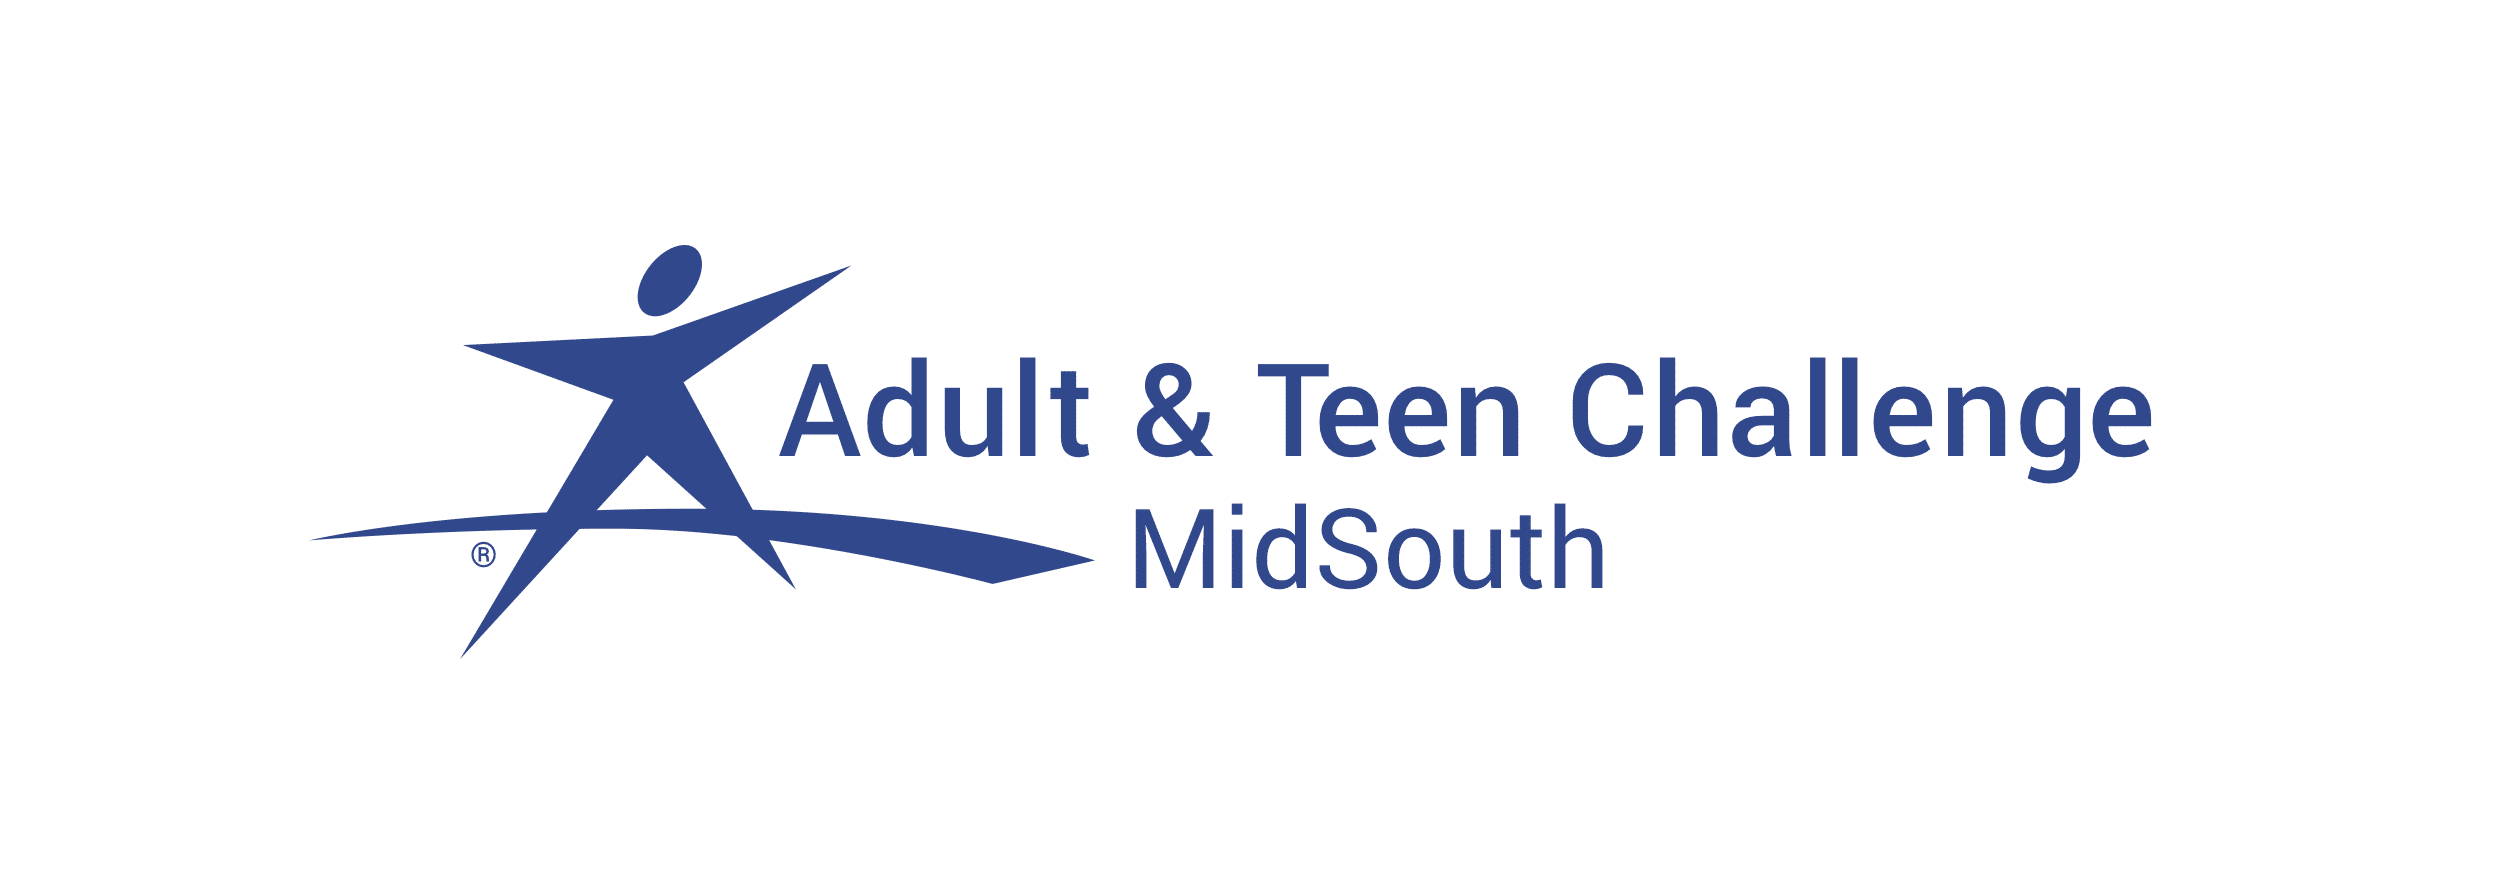 Adult & Teen Challenge MidSouth - Freedom From Addiction Starts Here